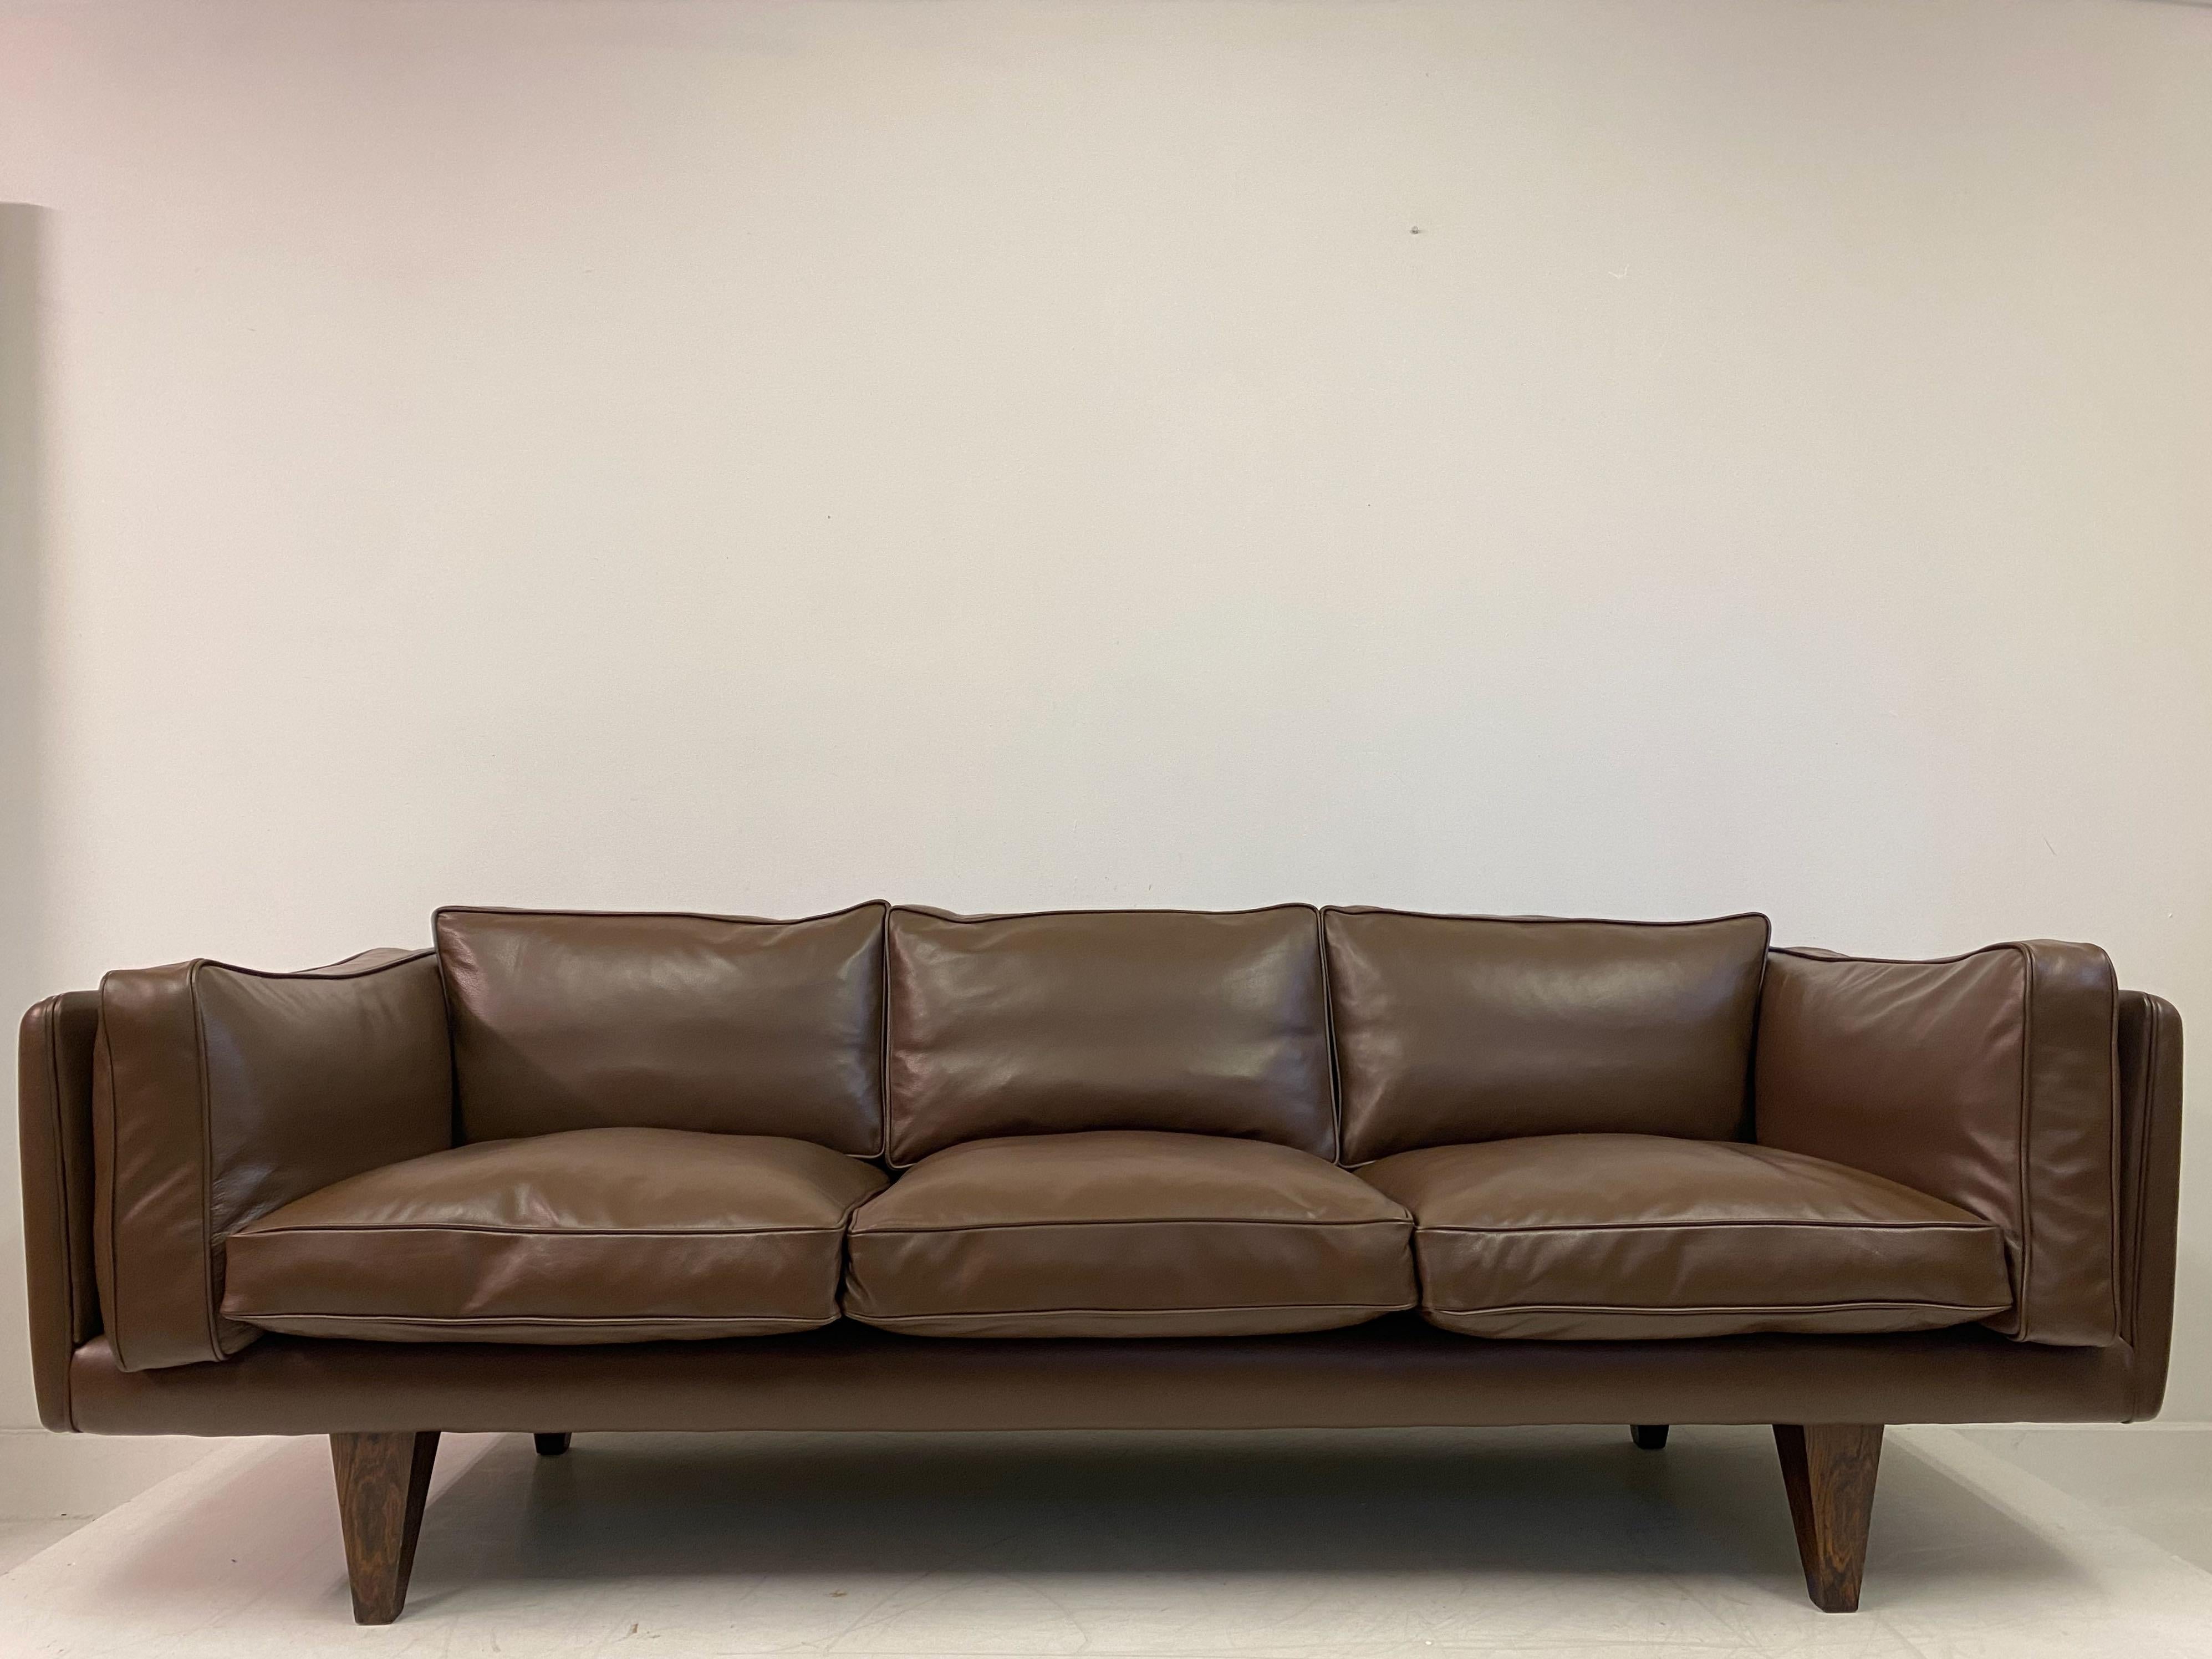 V11 Sofa

By Illum Wikkelso

For Holger Christiansen 

Reupholstered in brown leather

Feather filled cushions

Rosewood pyramid legs

Denmark 1960s.